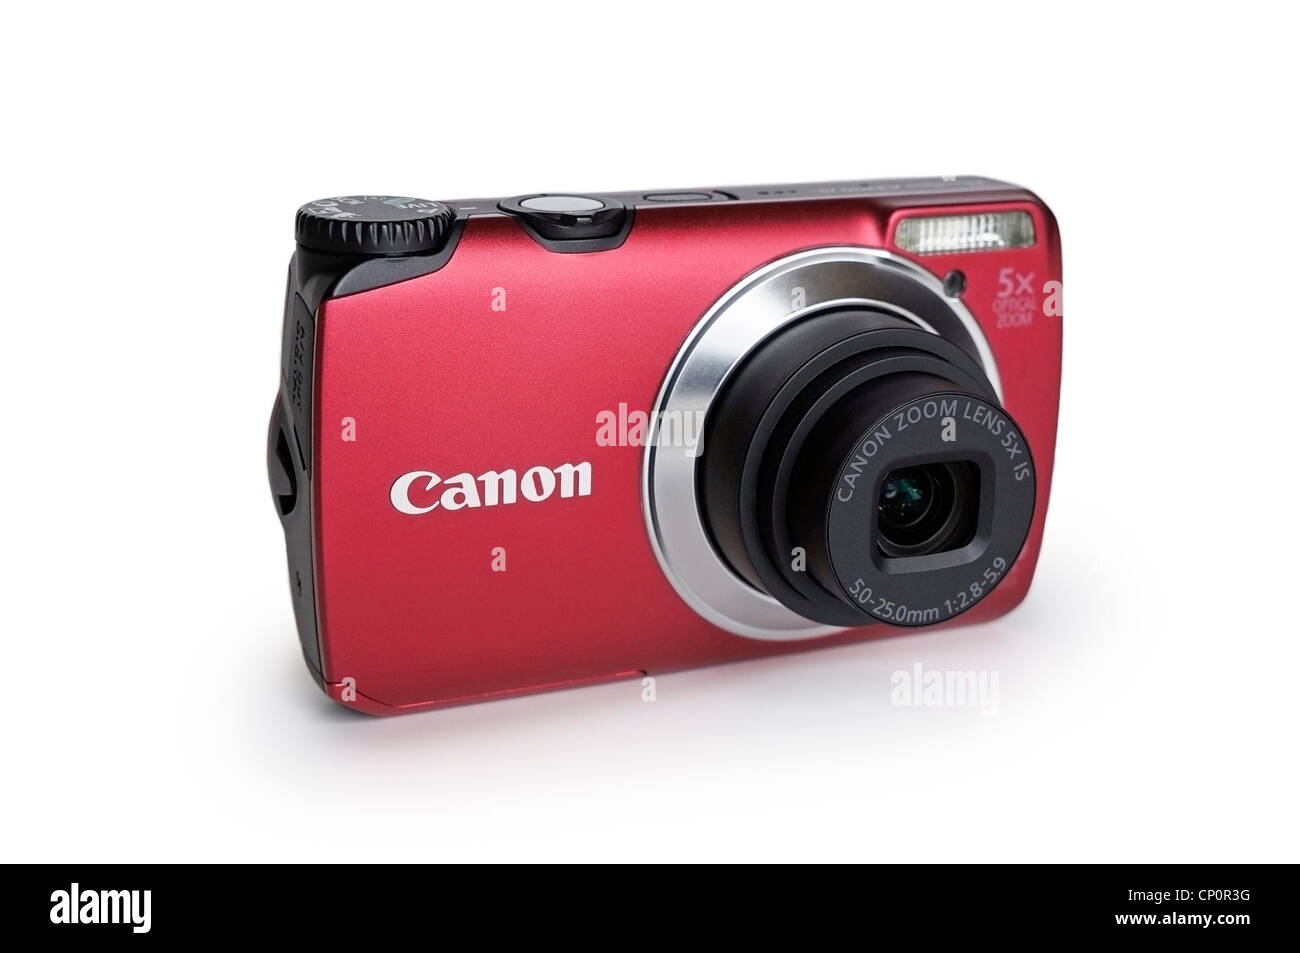 Camera, Digital Point and Shoot Compact Stock Photo